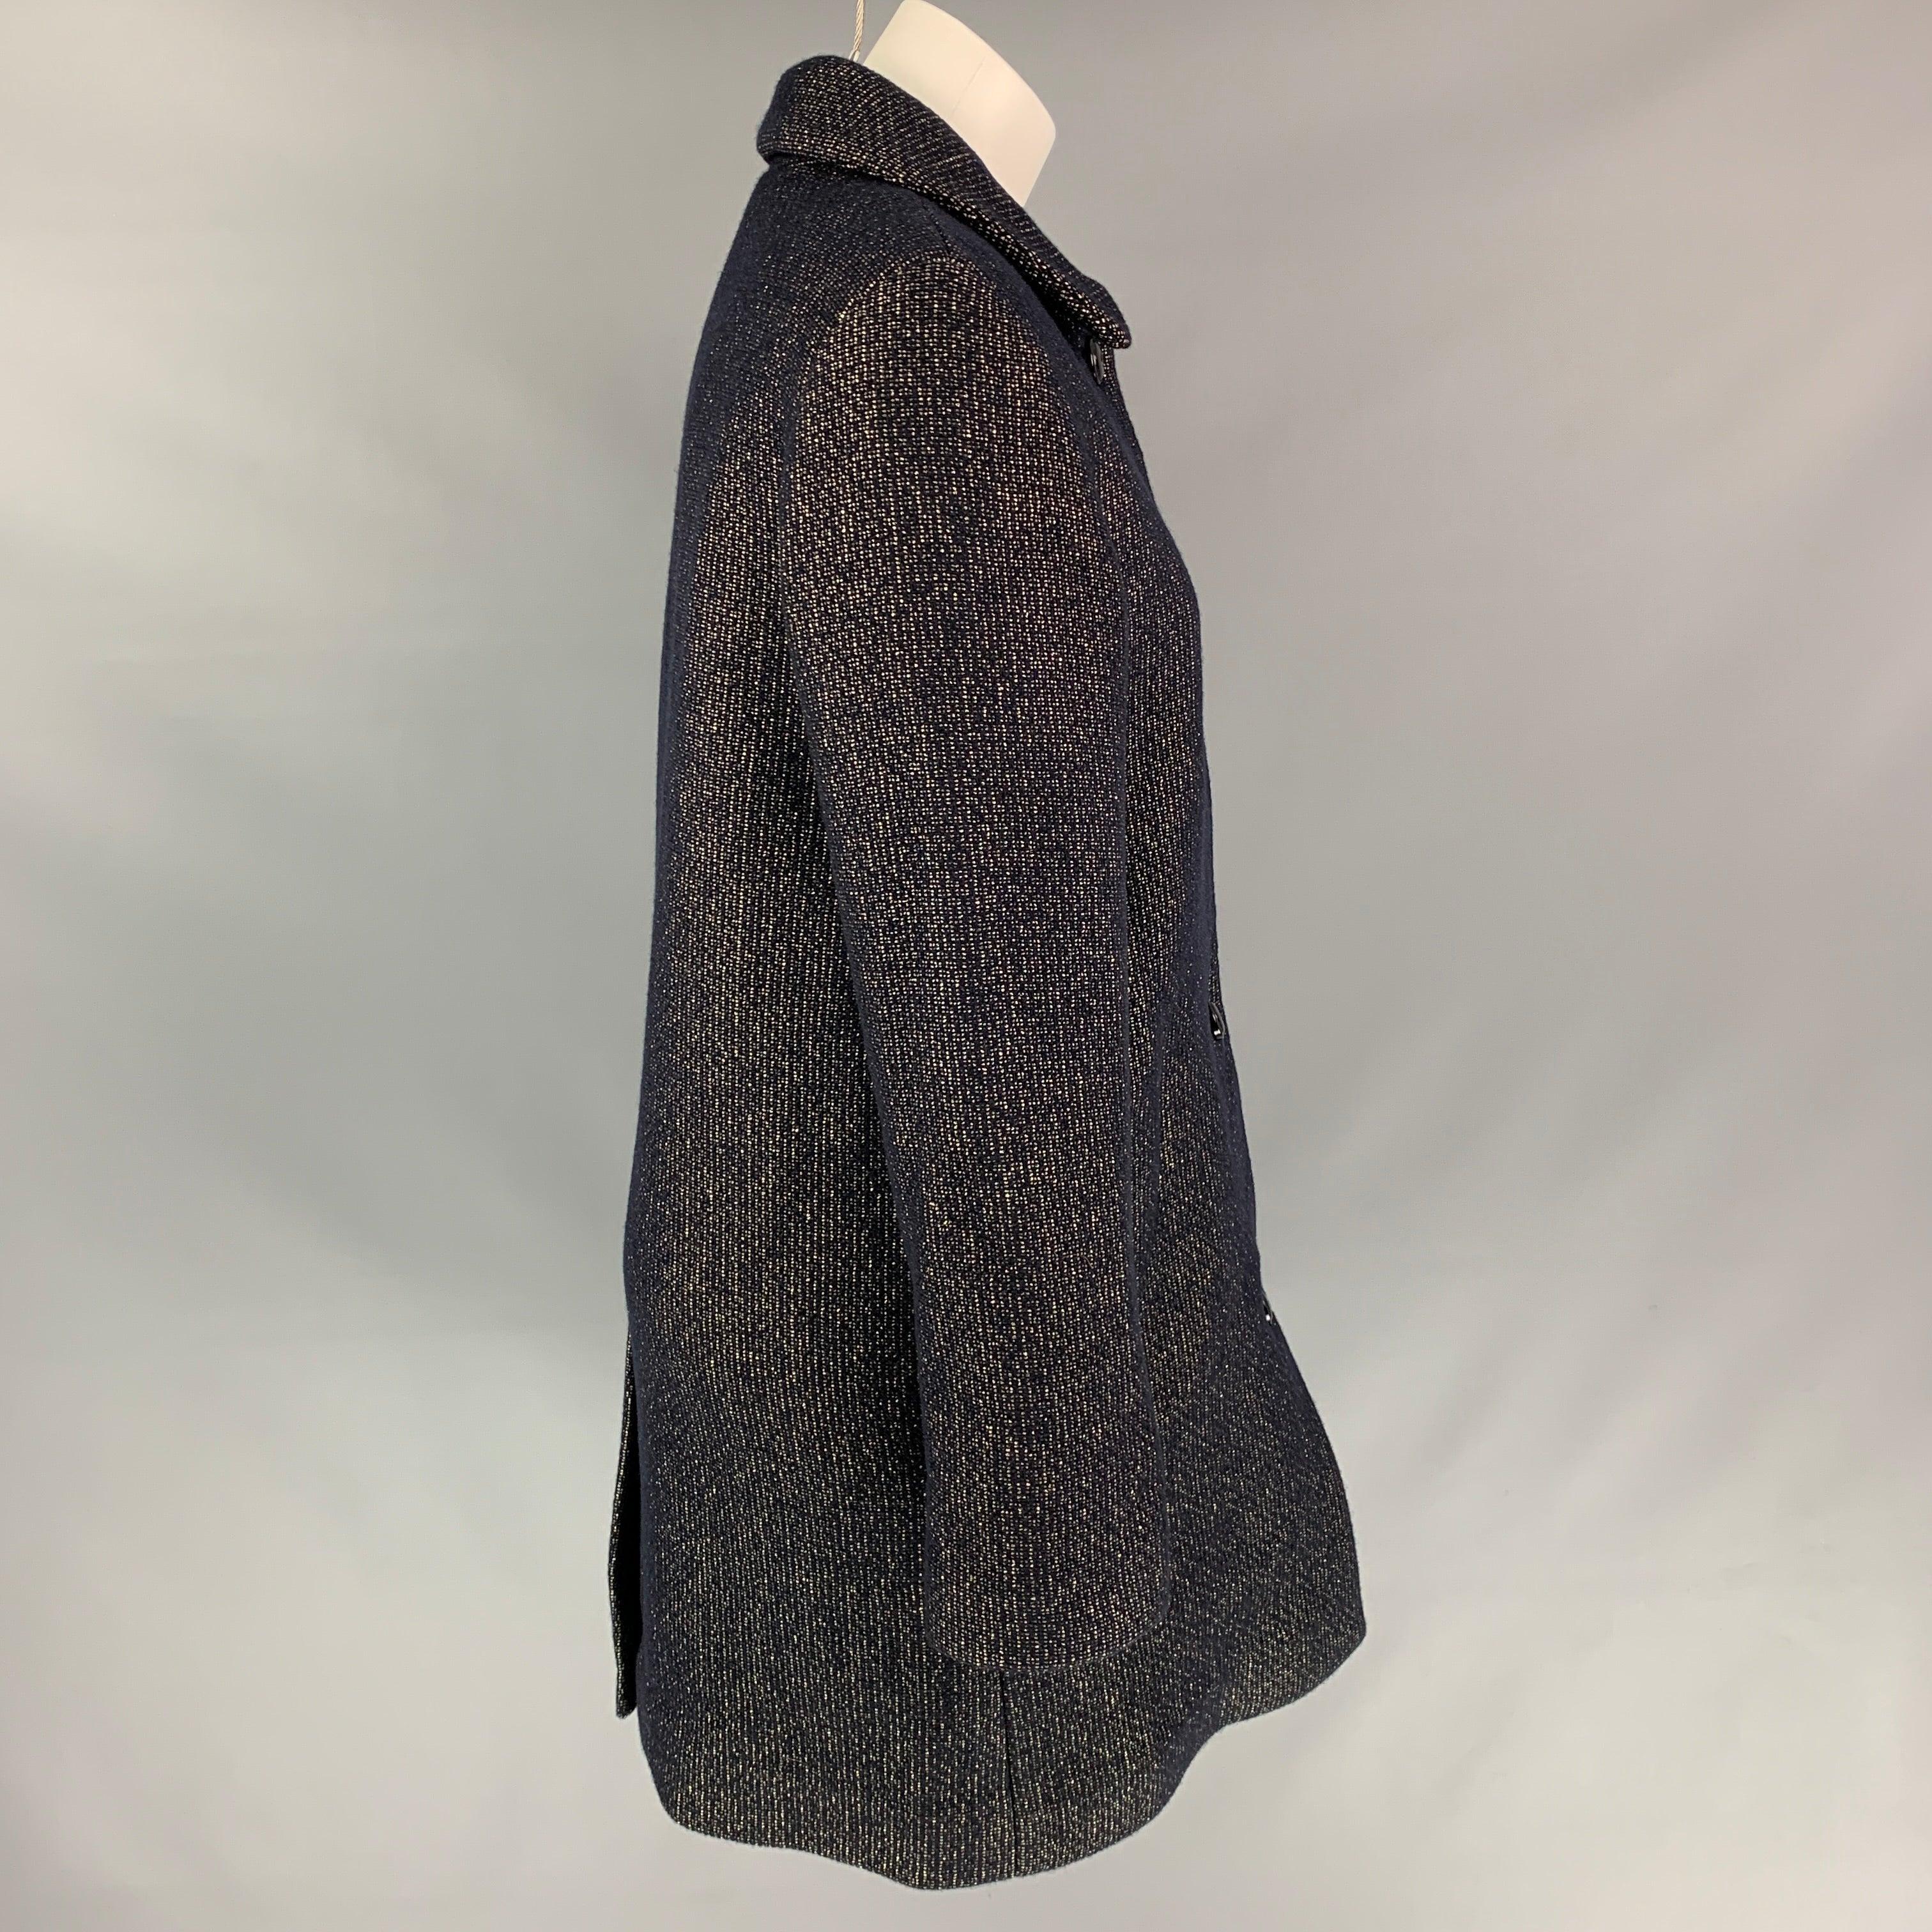 A.P.C. Size 6 Black & Gold Wool Blend Metallic Coat In Good Condition For Sale In San Francisco, CA